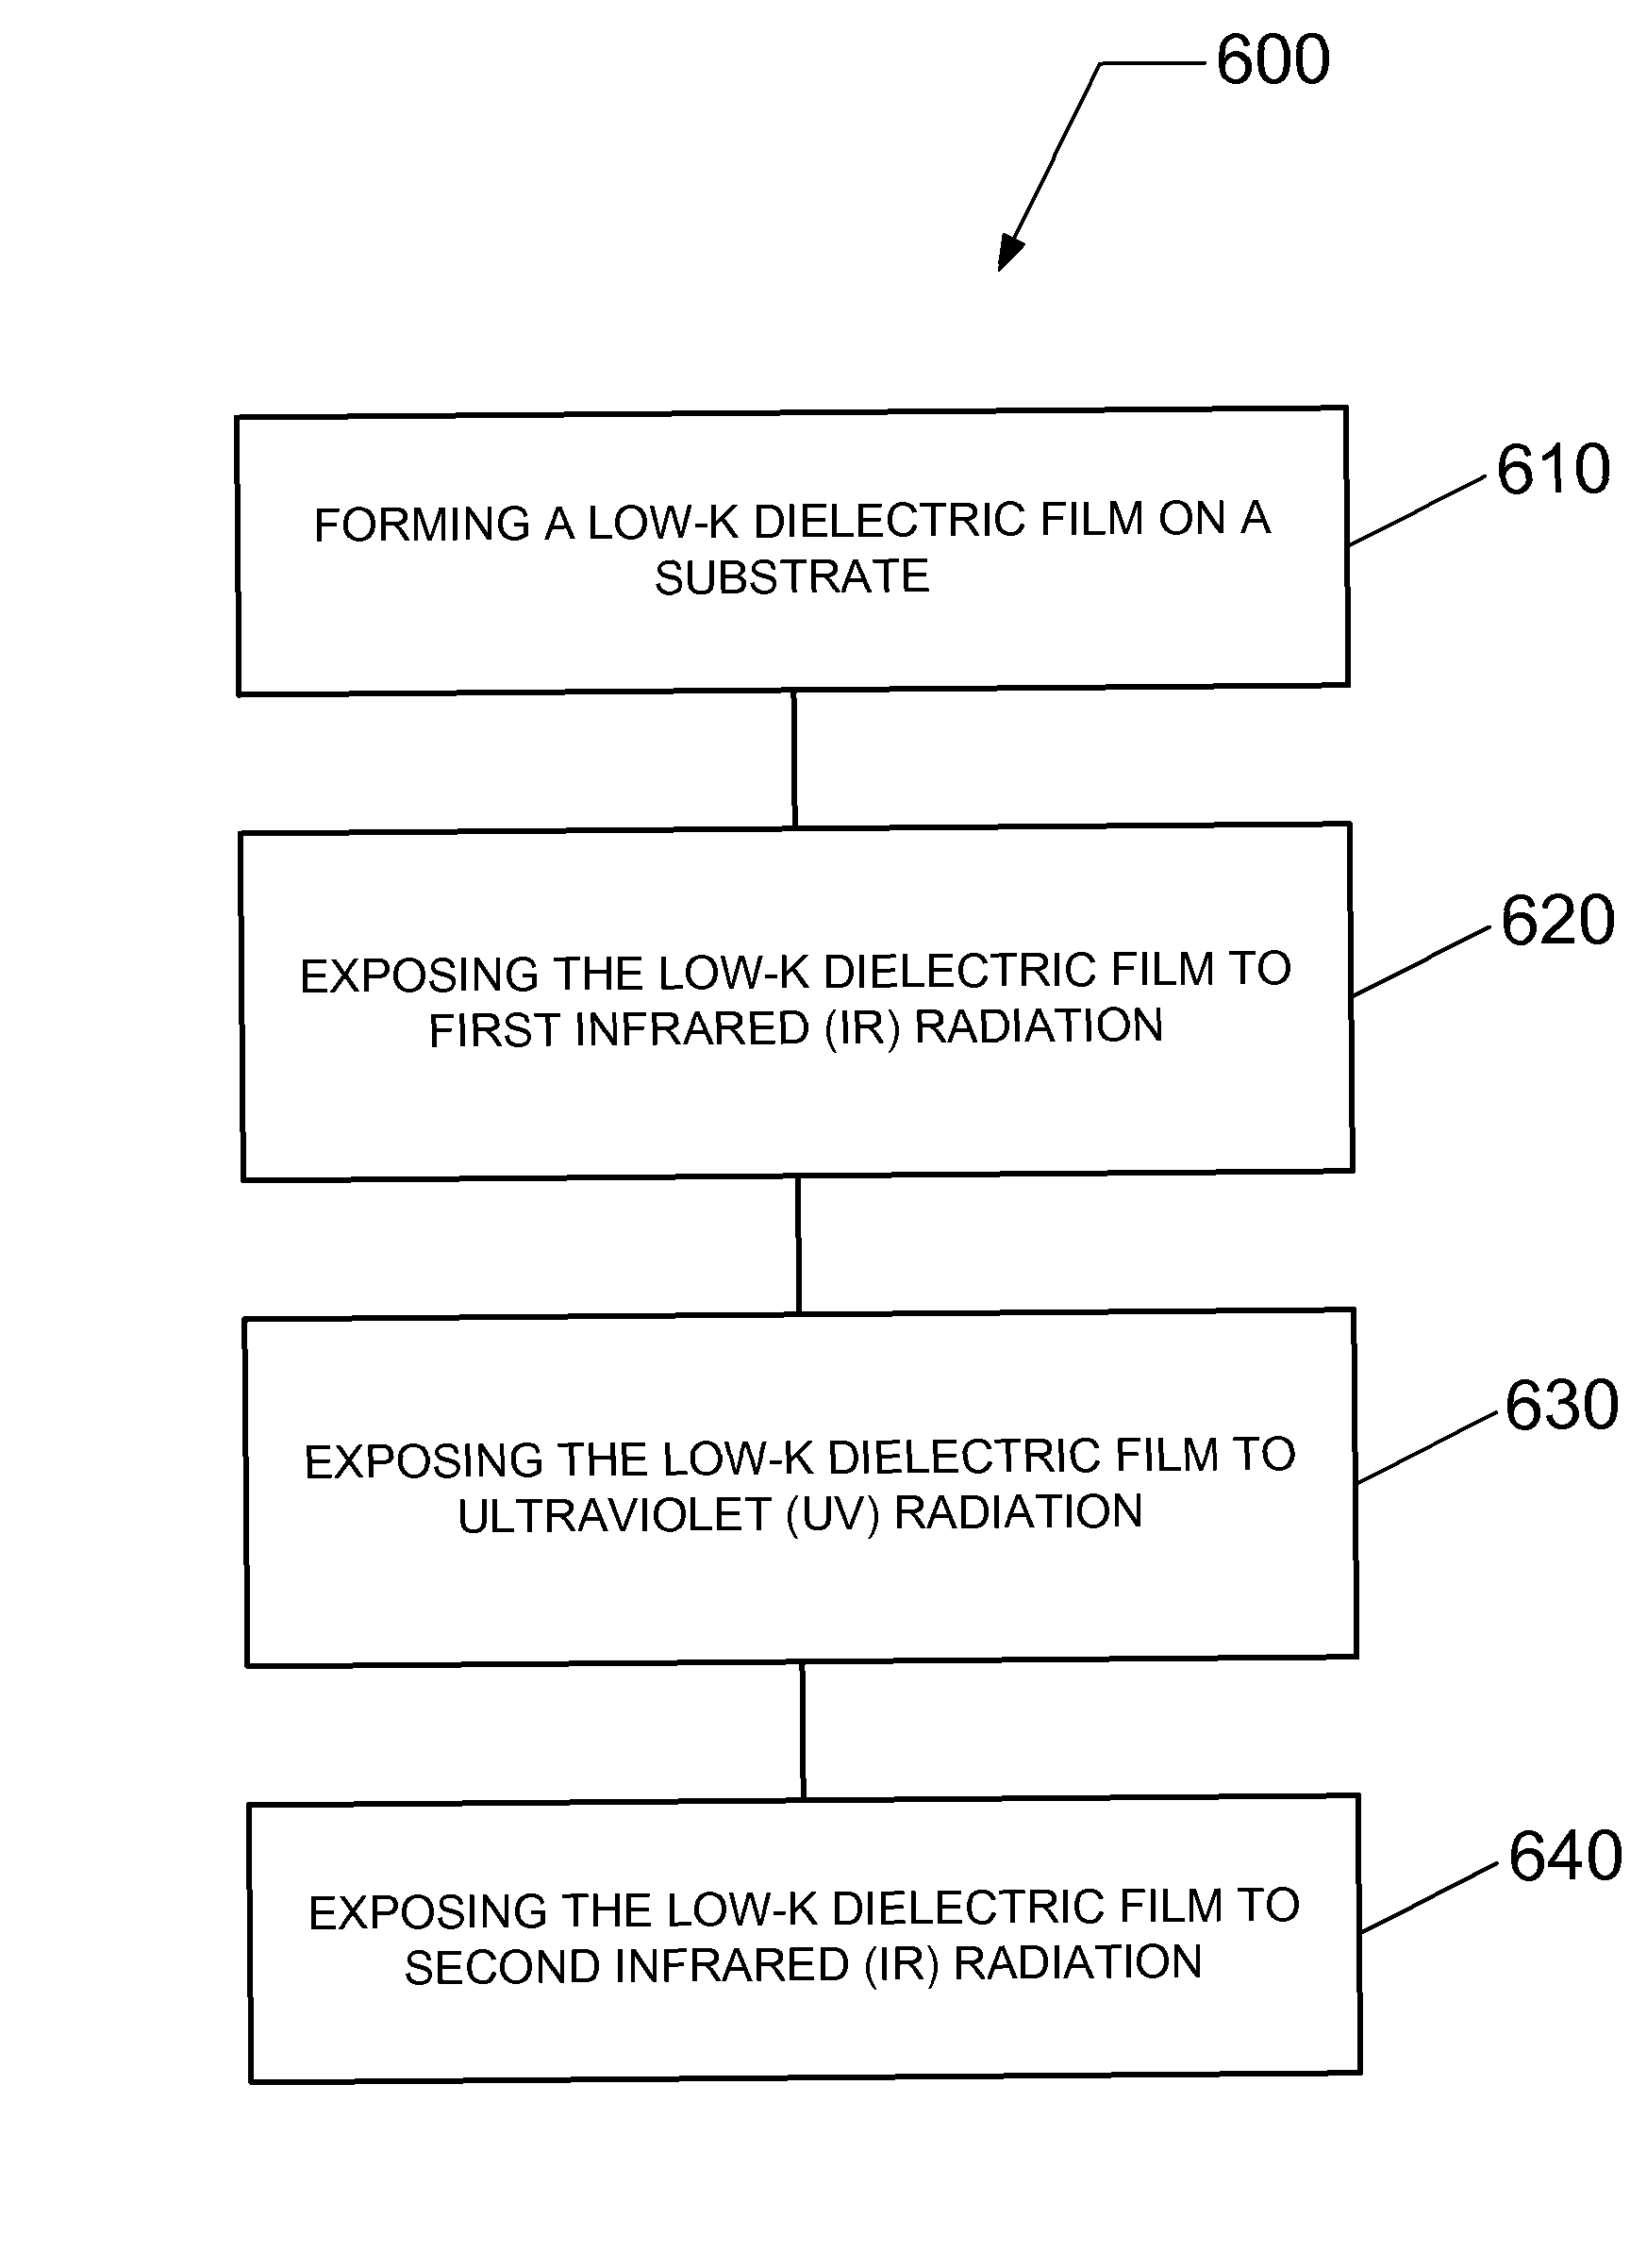 Method for removing a pore-generating material from an uncured low-k dielectric film